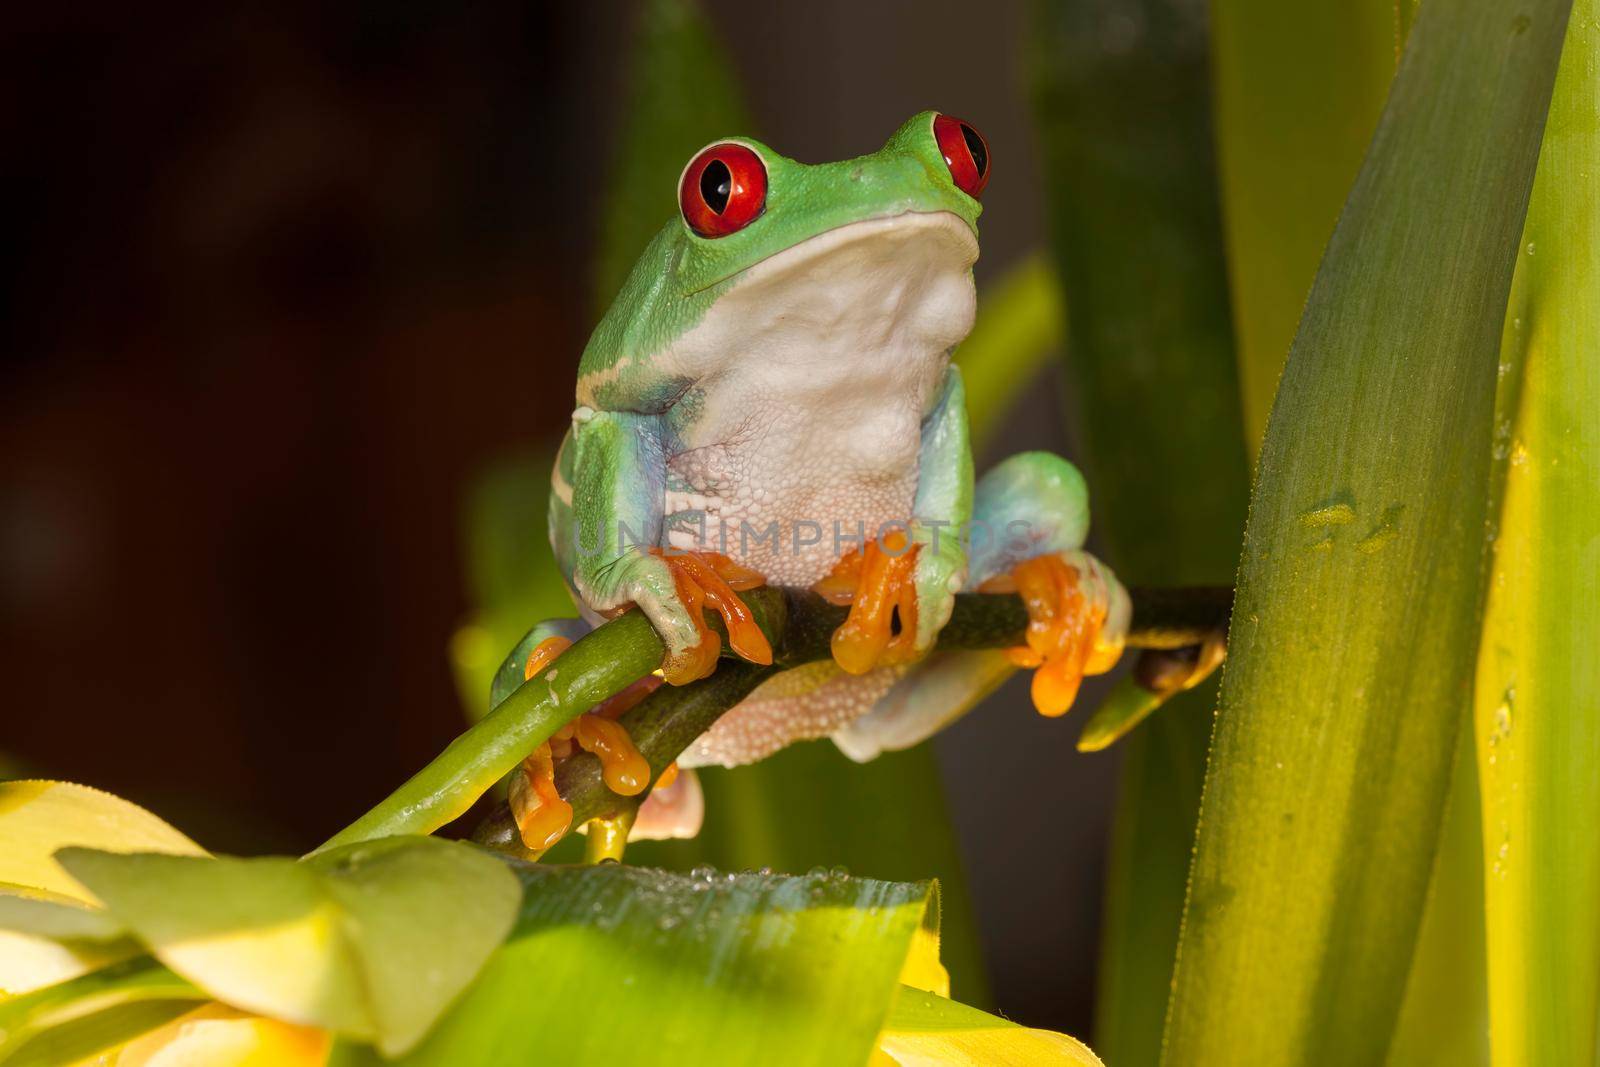 Red-eyed tree frog swings on the flower stem between orchids